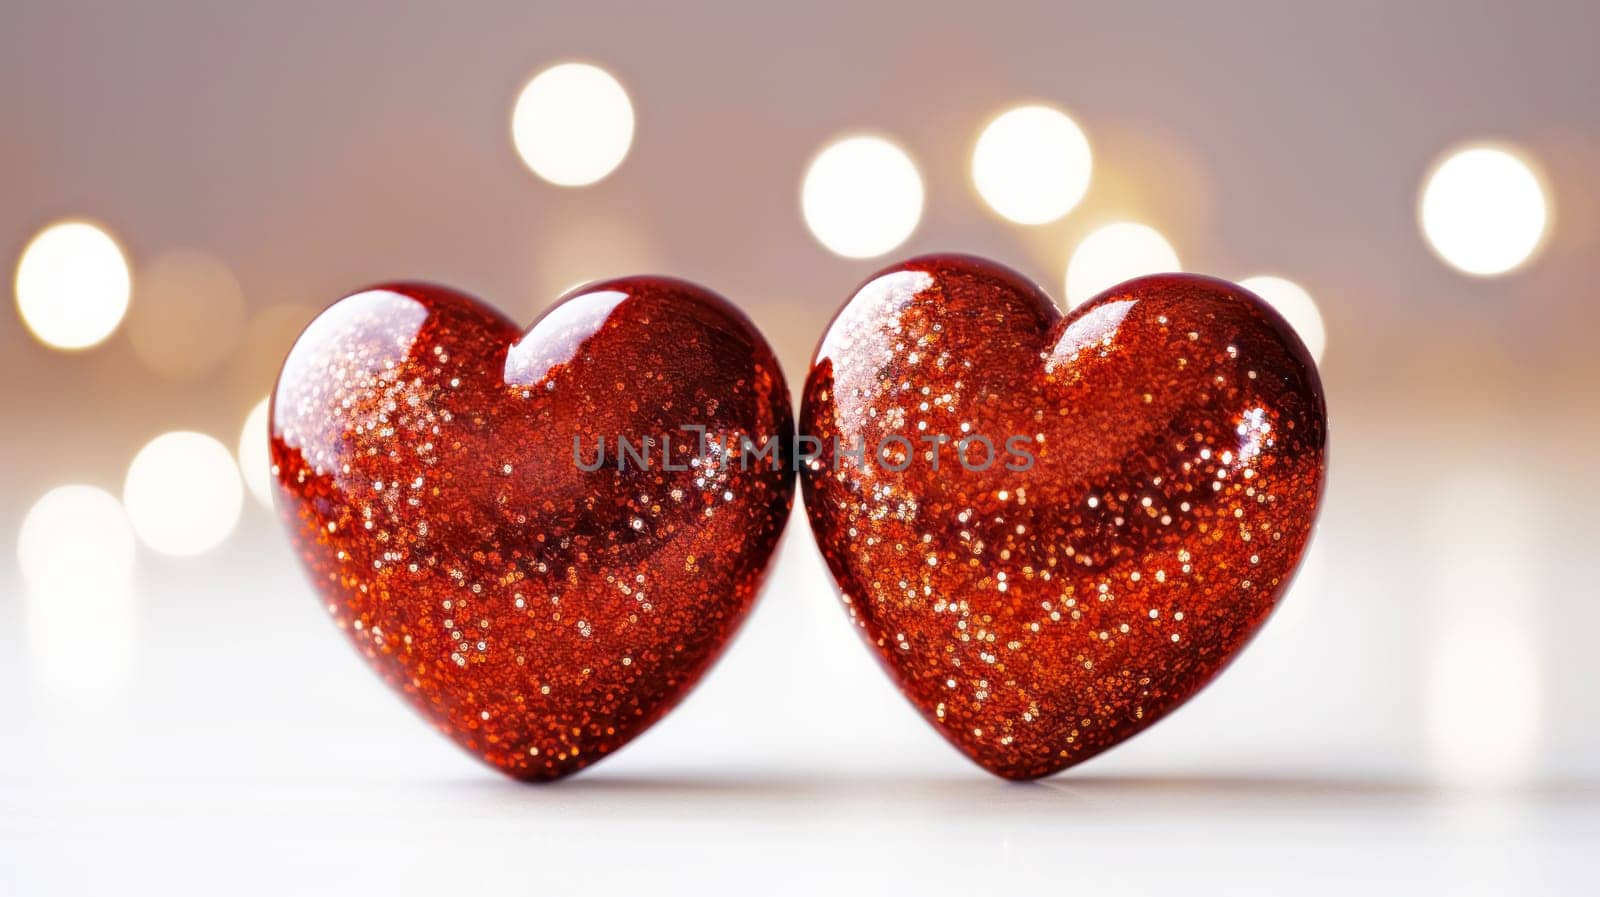 Two red hearts as a symbol of love. Valentine's day background by NataliPopova